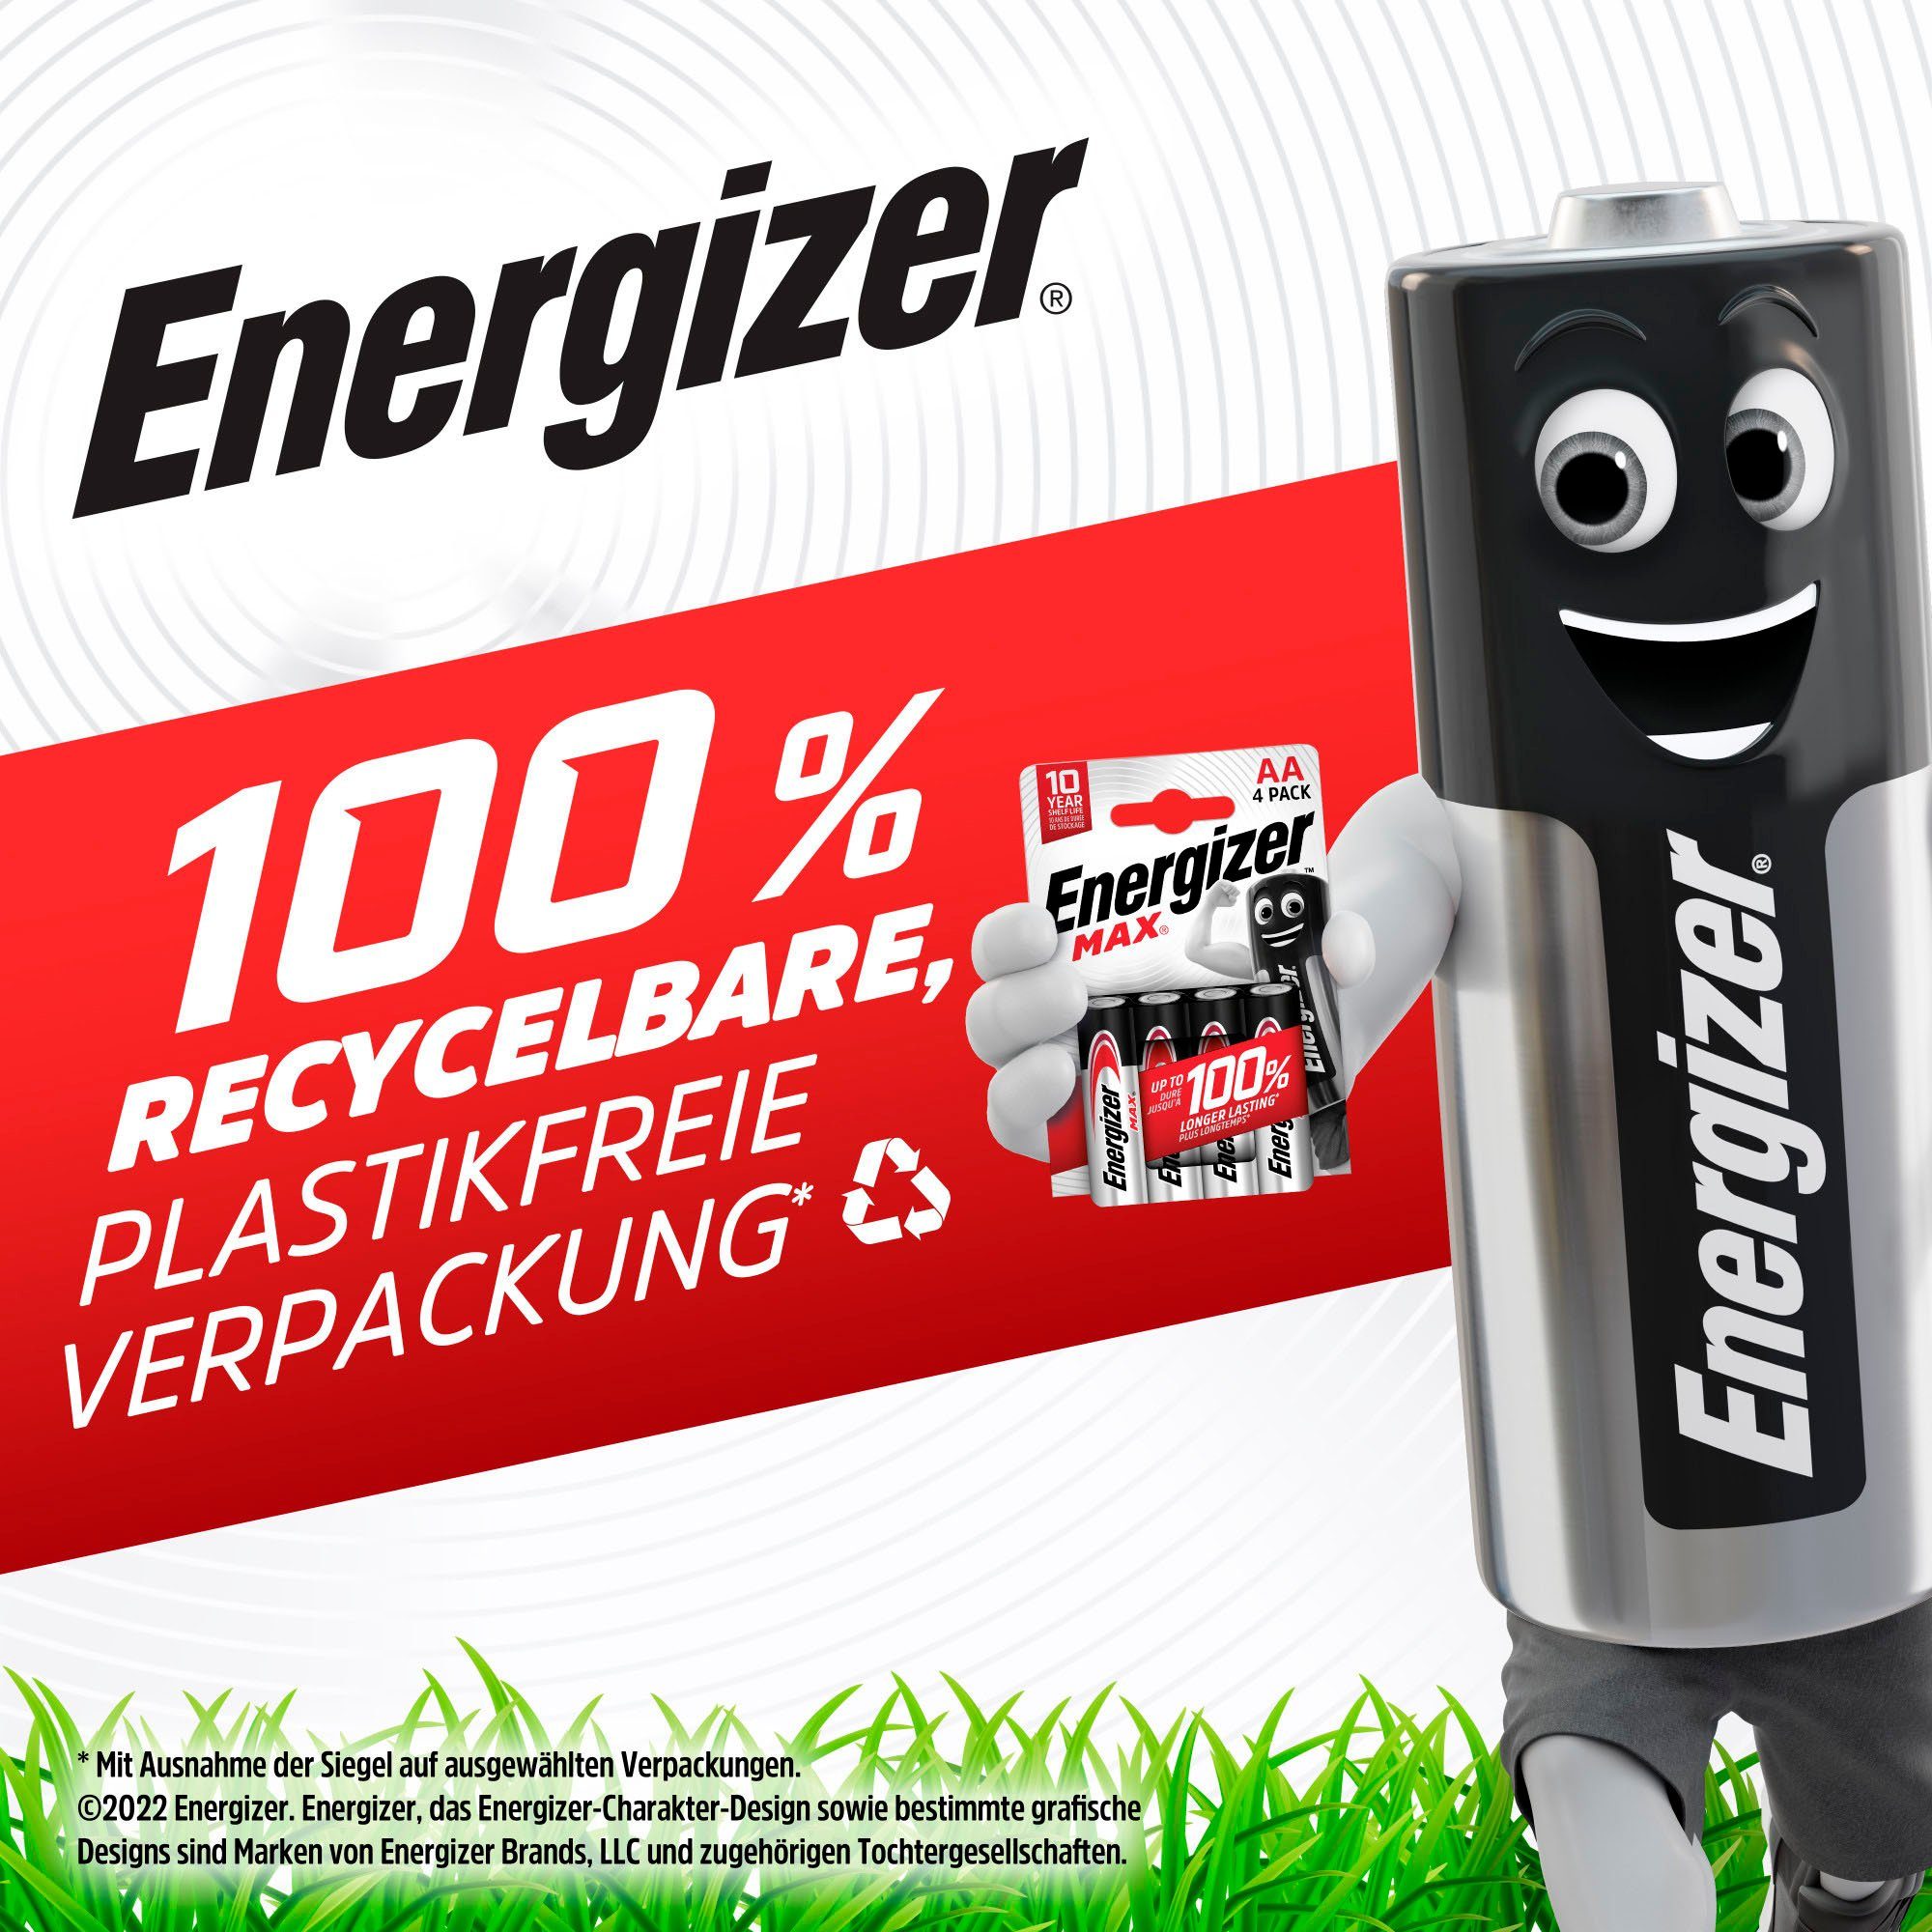 Promotionware Max Energizer (32 Batterie, St) Micro (AAA) LR03 Stück 24+8